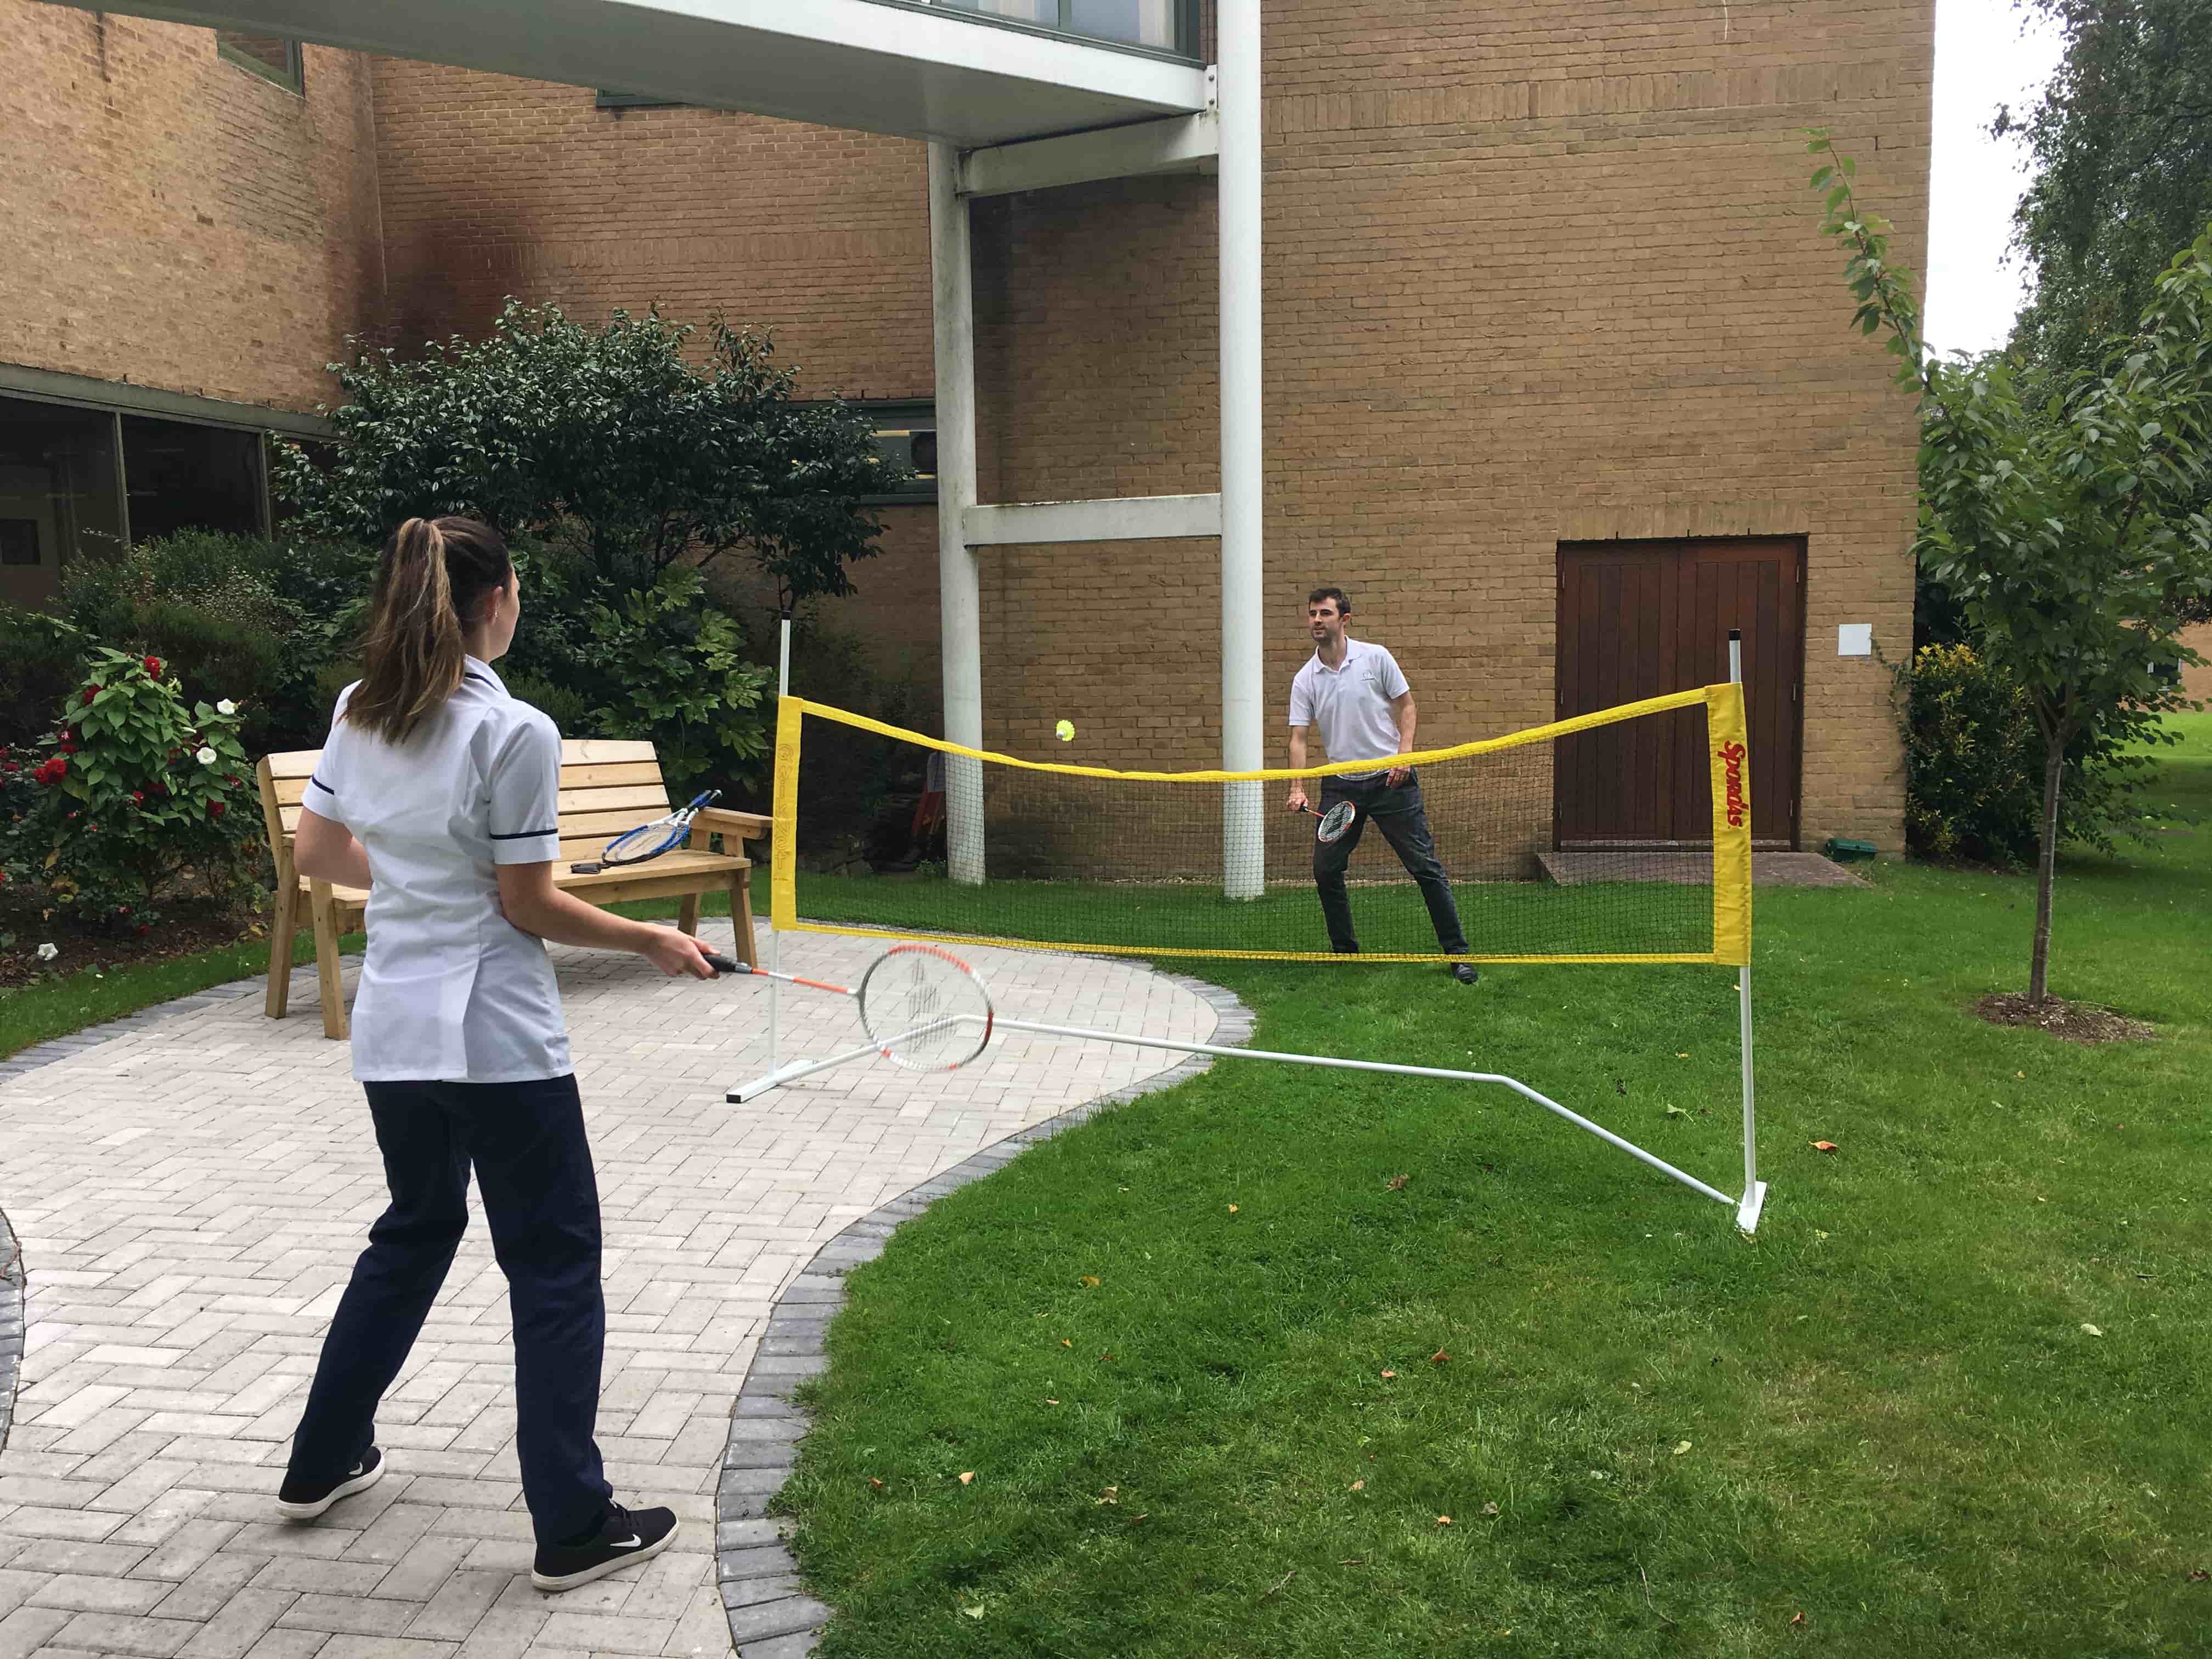 Staff playing badminton in hospital grounds